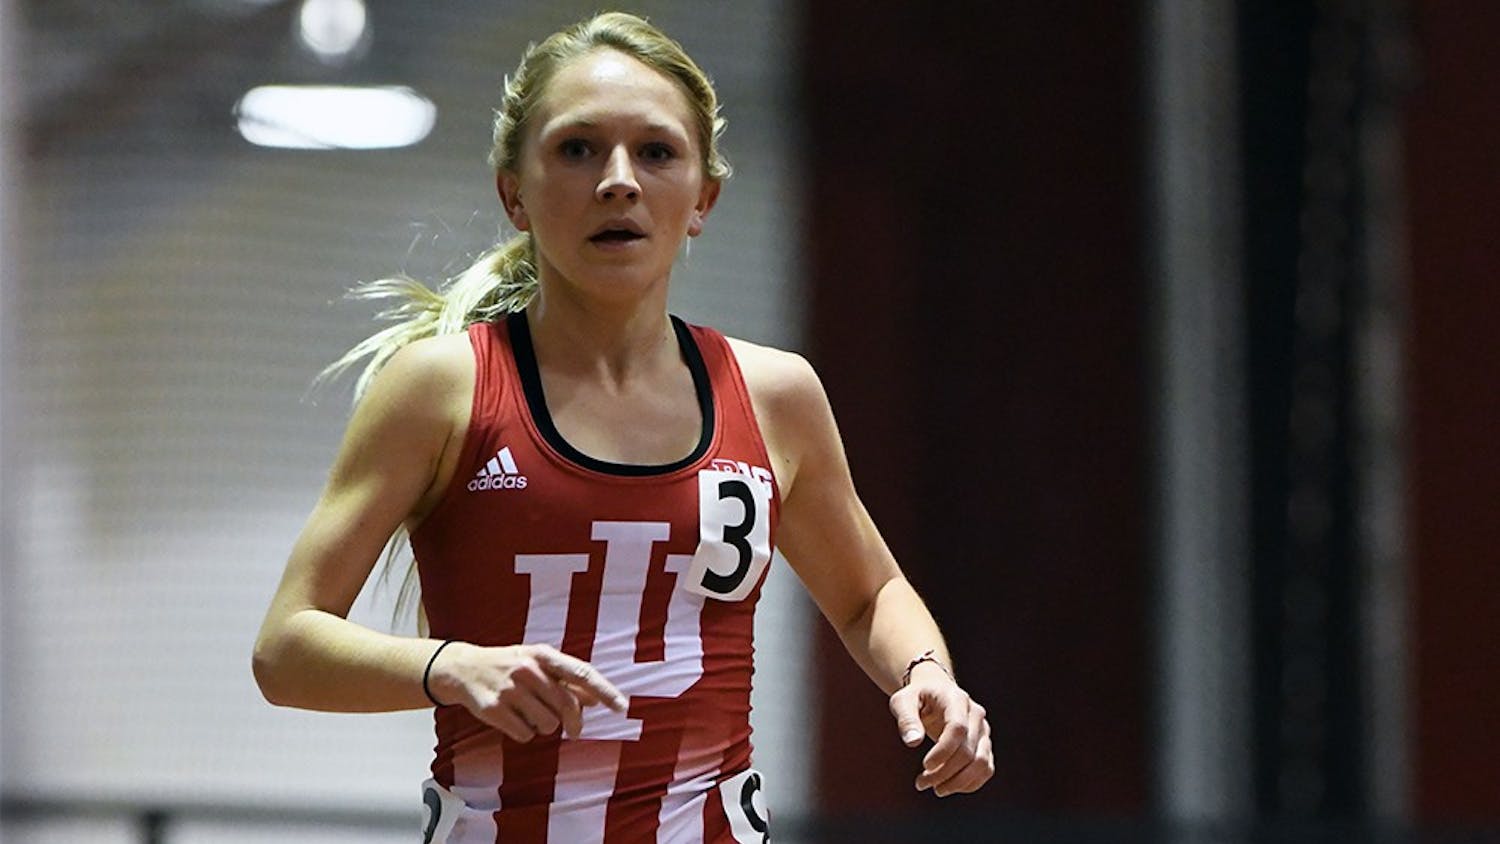 Junior Katherine Receveur races in the 5000 meter in the Hoosier Open in Harry Gladstein Fieldhouse. Receveur won the event in a new facility record time of 15:48.10. She, and six other teammates competed in the Alex Wilson Invitational this weekend.